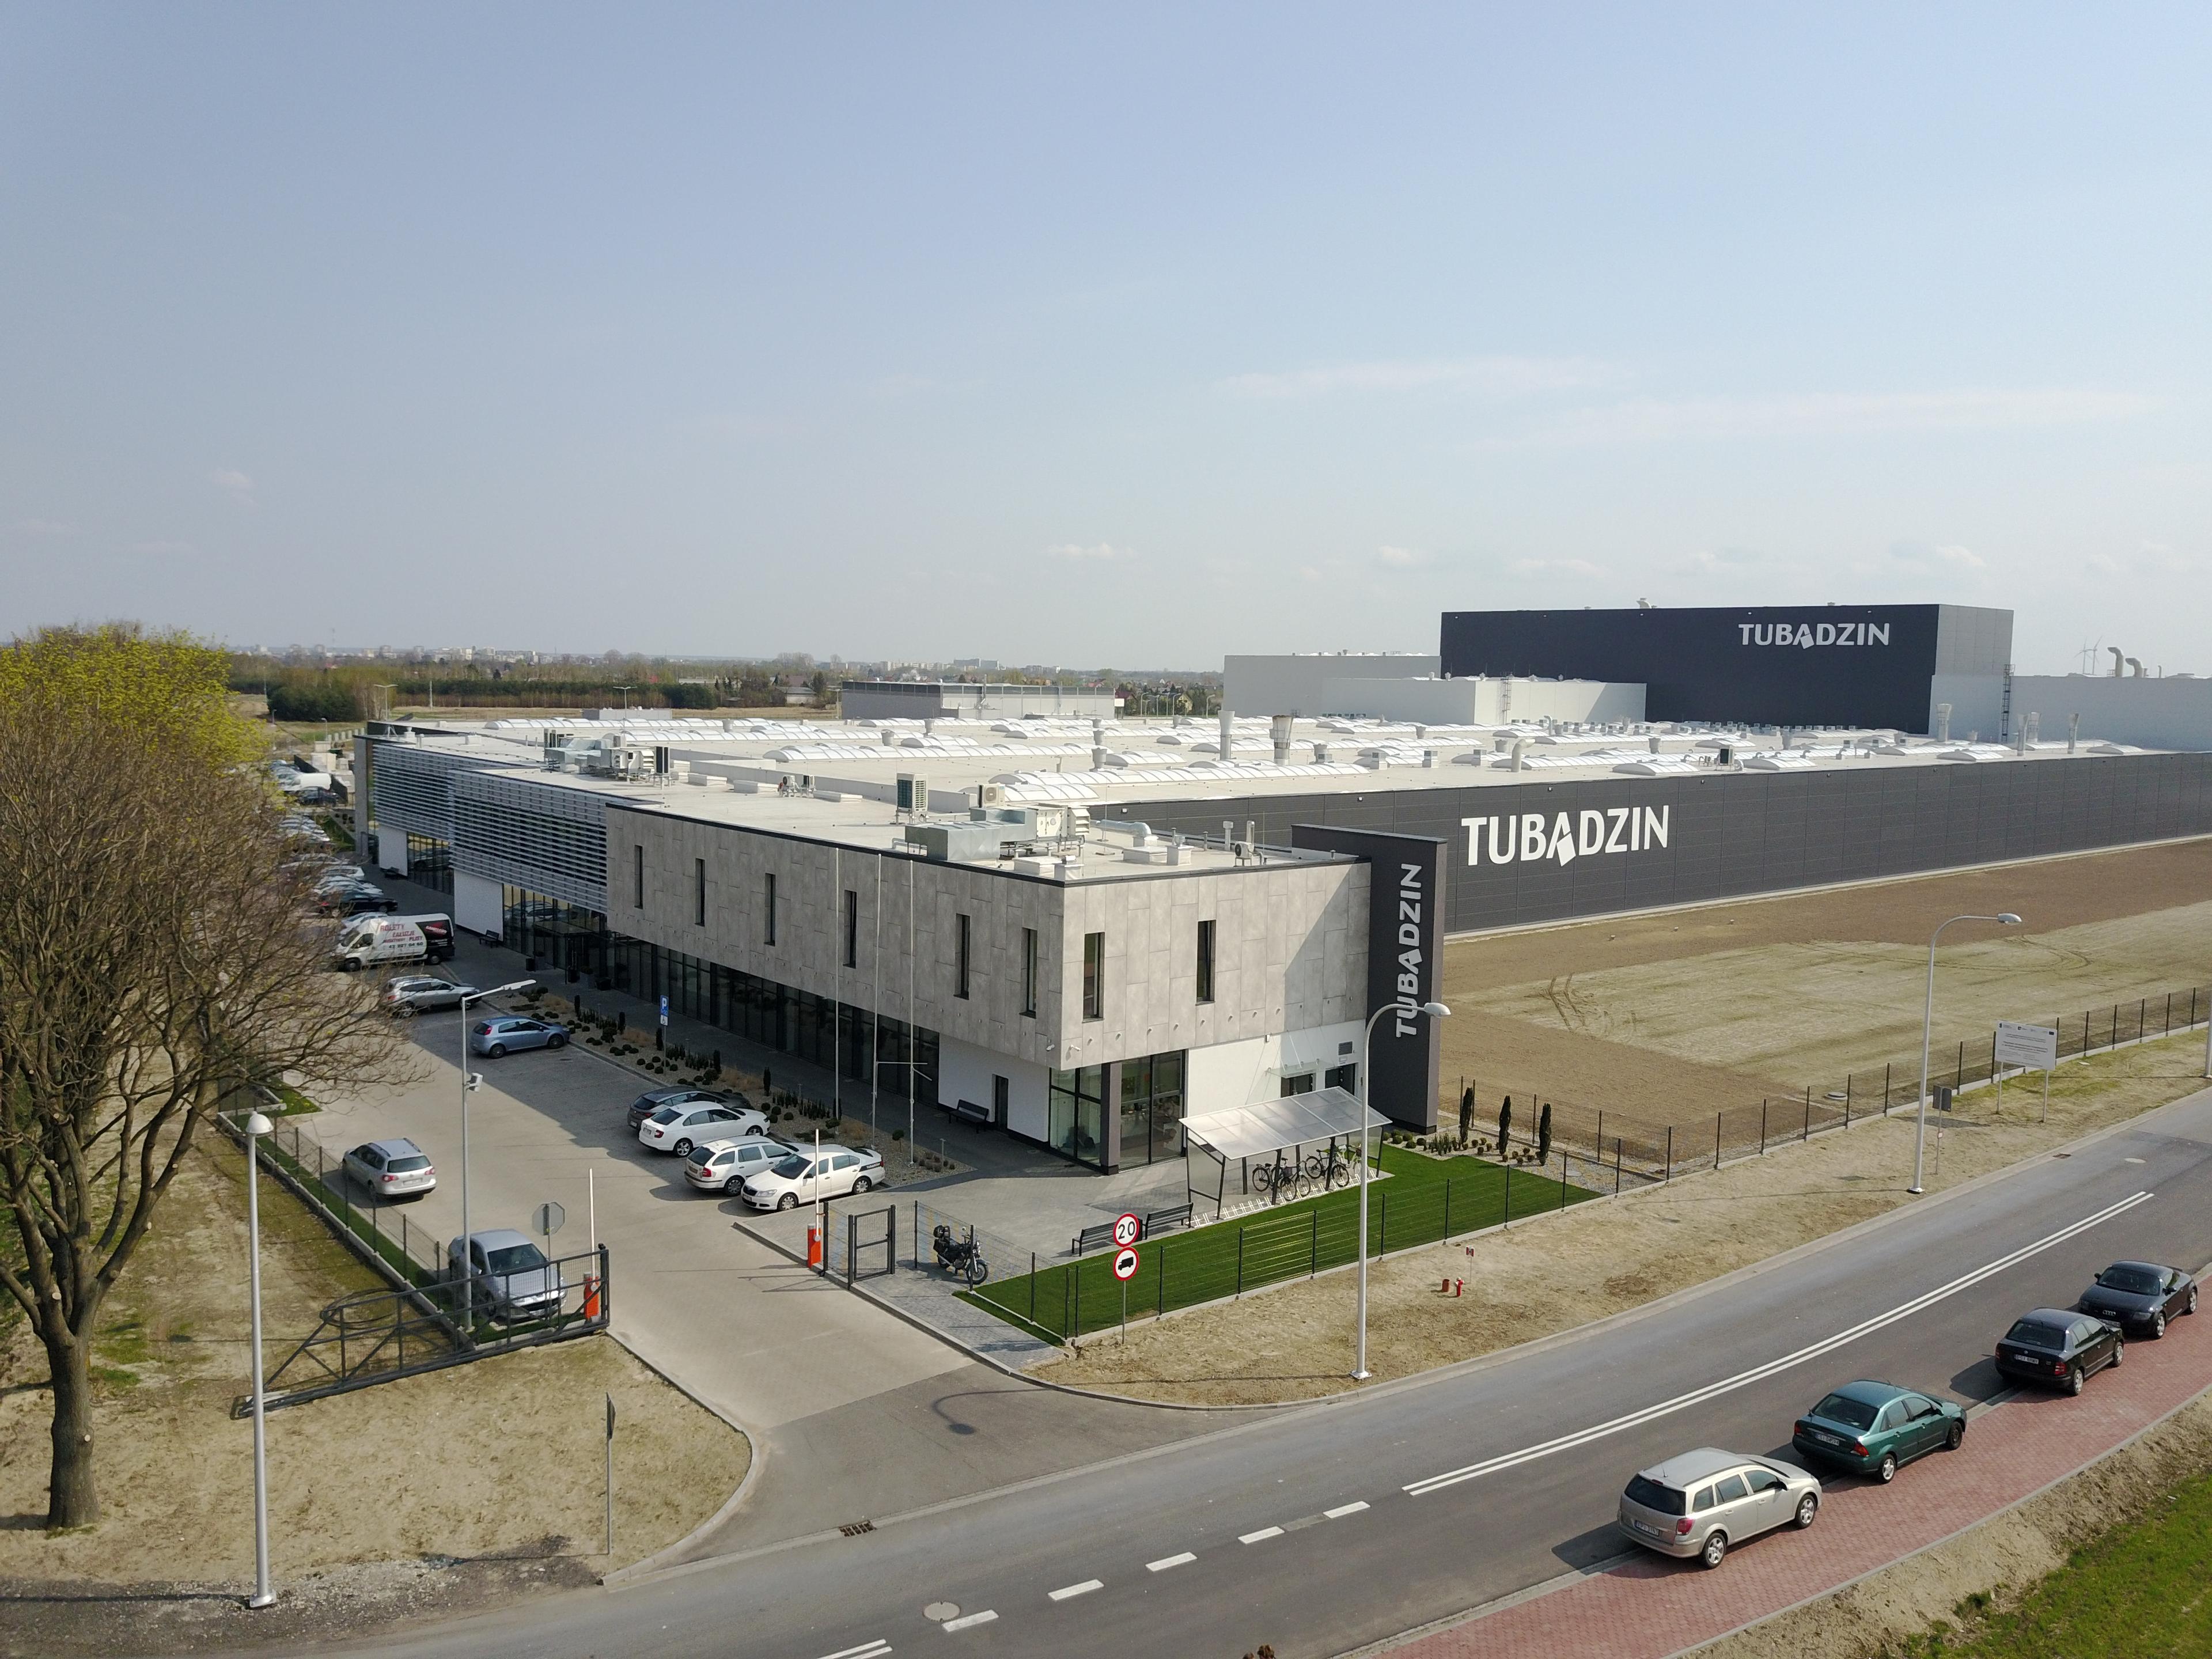 THE TUBADZIN GROUP MAINTAINS CONTINUITY OF PRODUCTION WHILE OBSERVING ALL SAFETY PROCEDURES